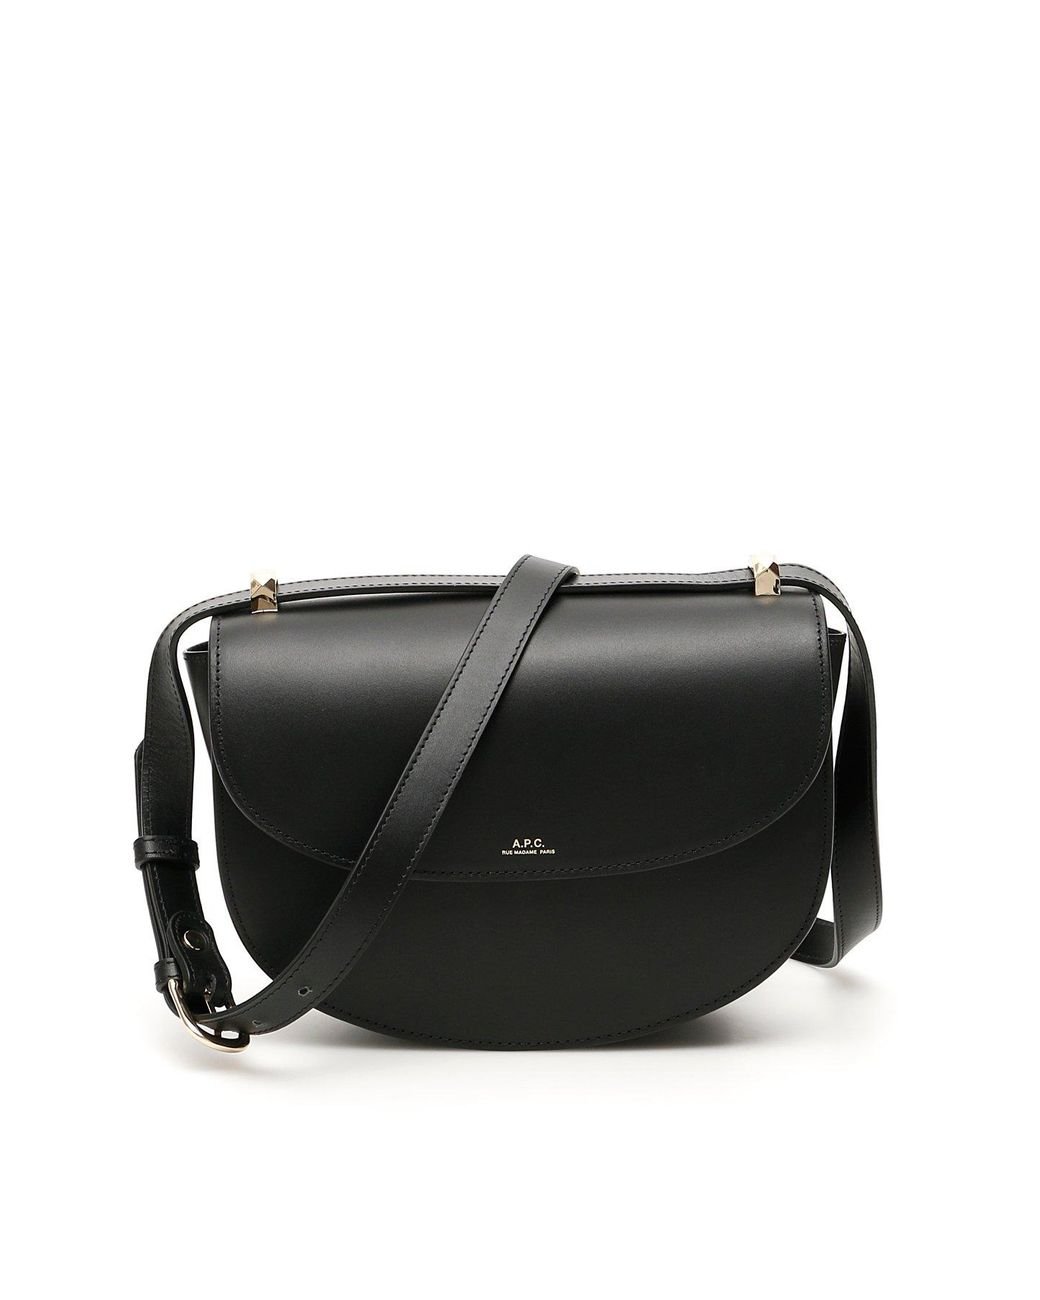 A.P.C. Genève Leather Cross-body Bag in Black - Save 50% - Lyst